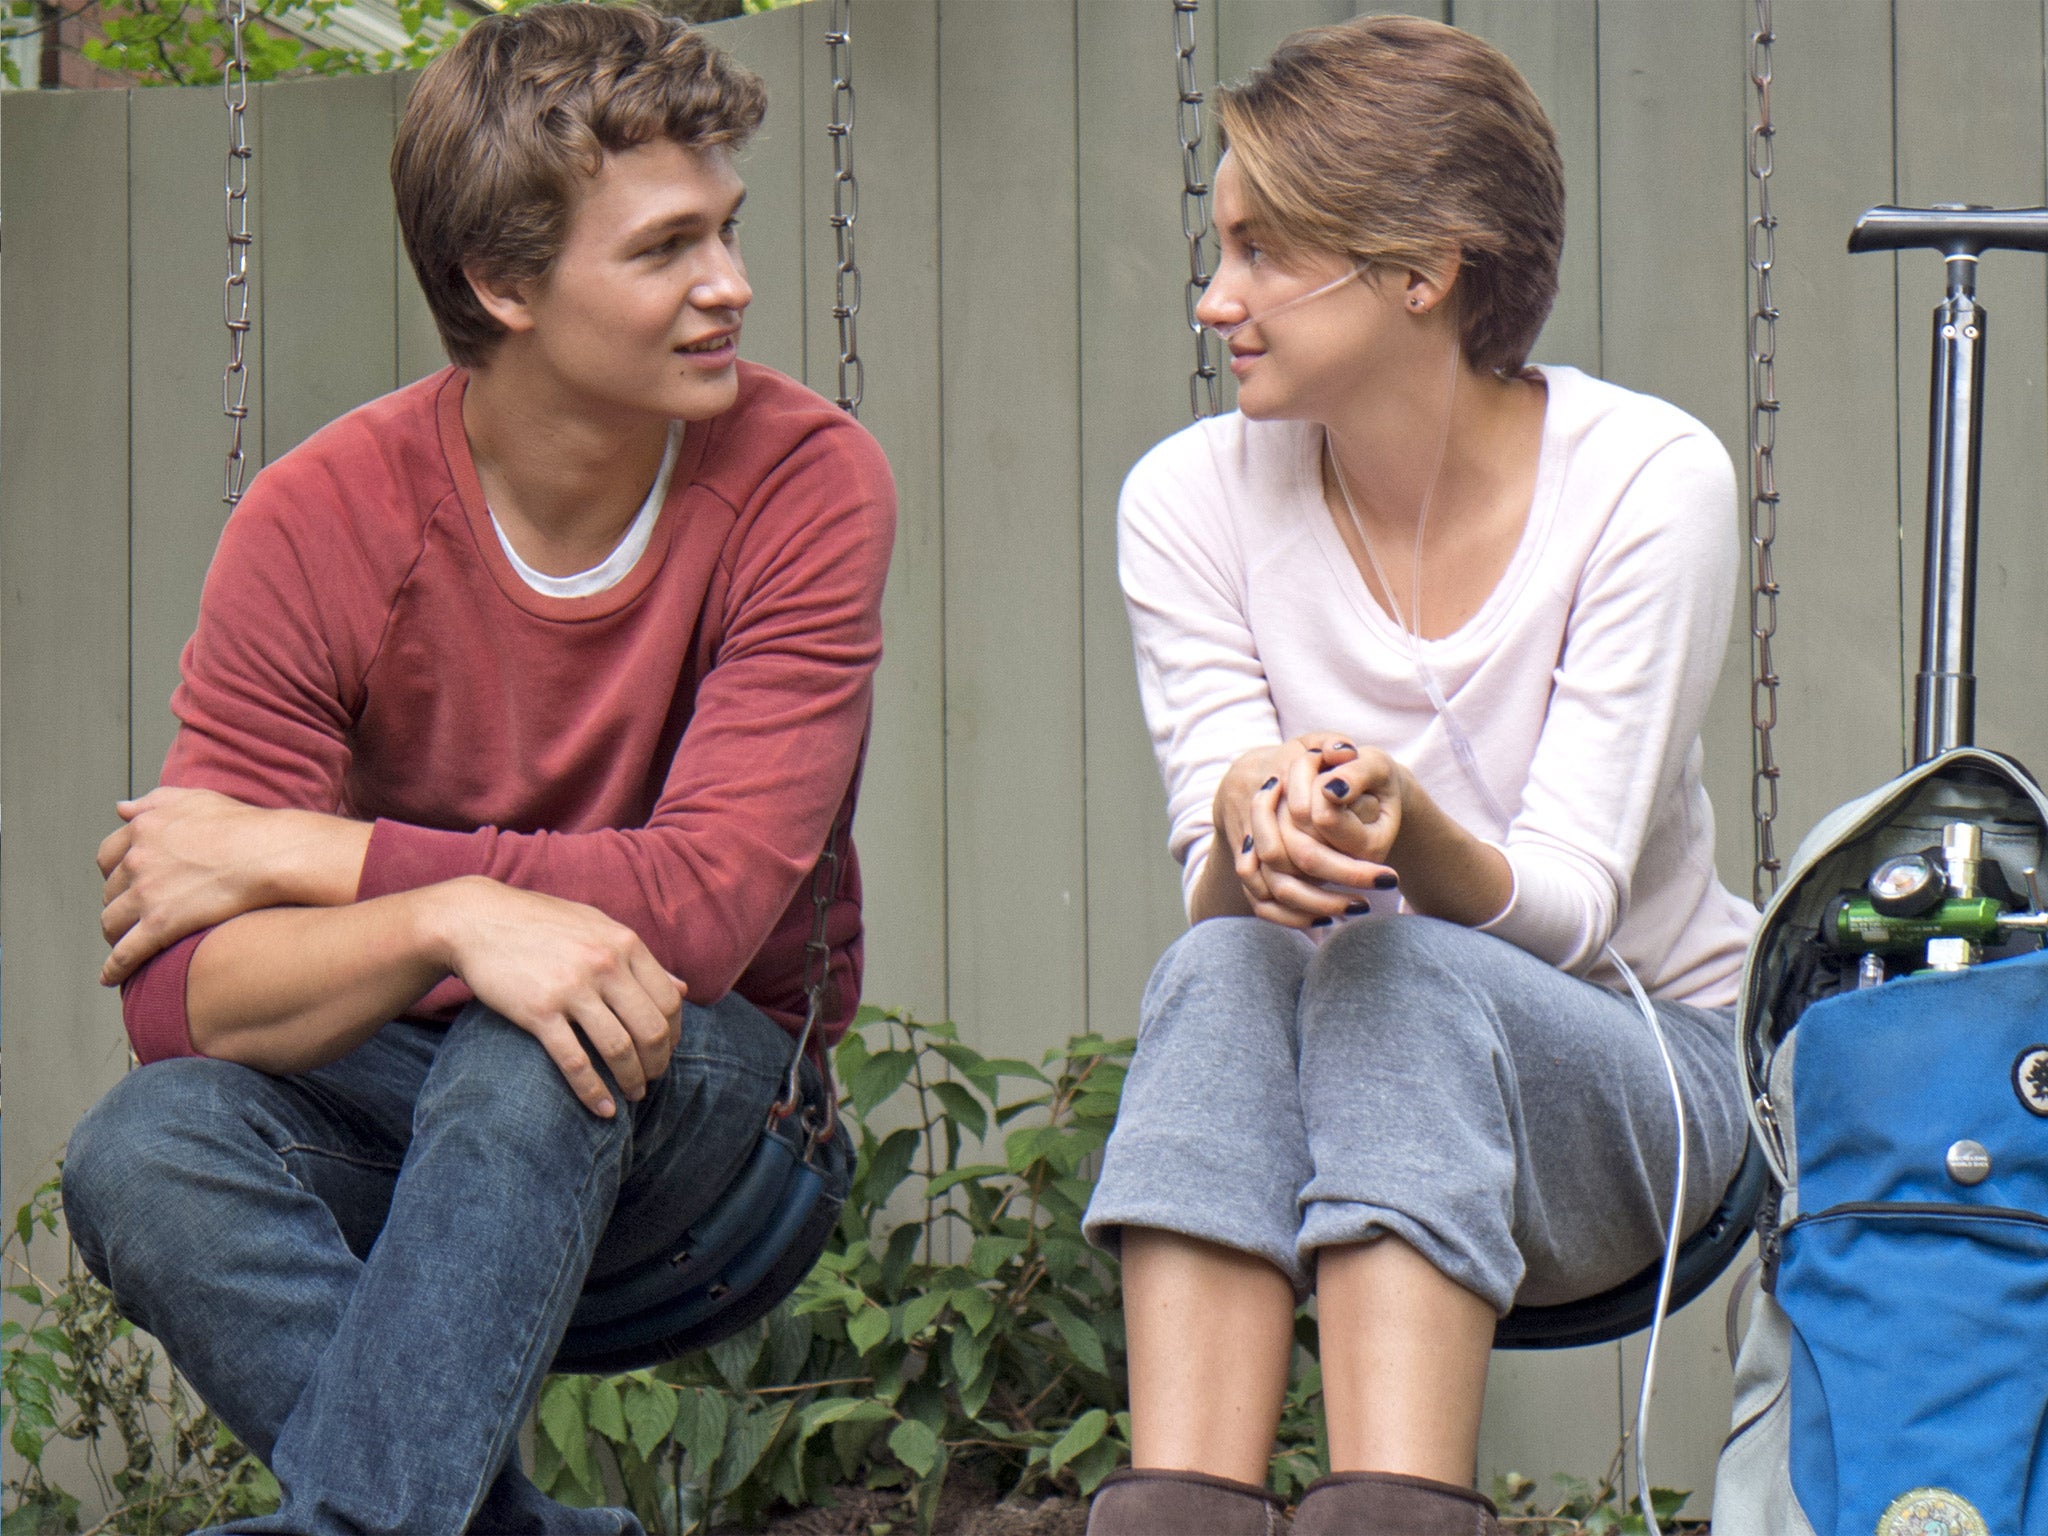 the fault in our stars book for free